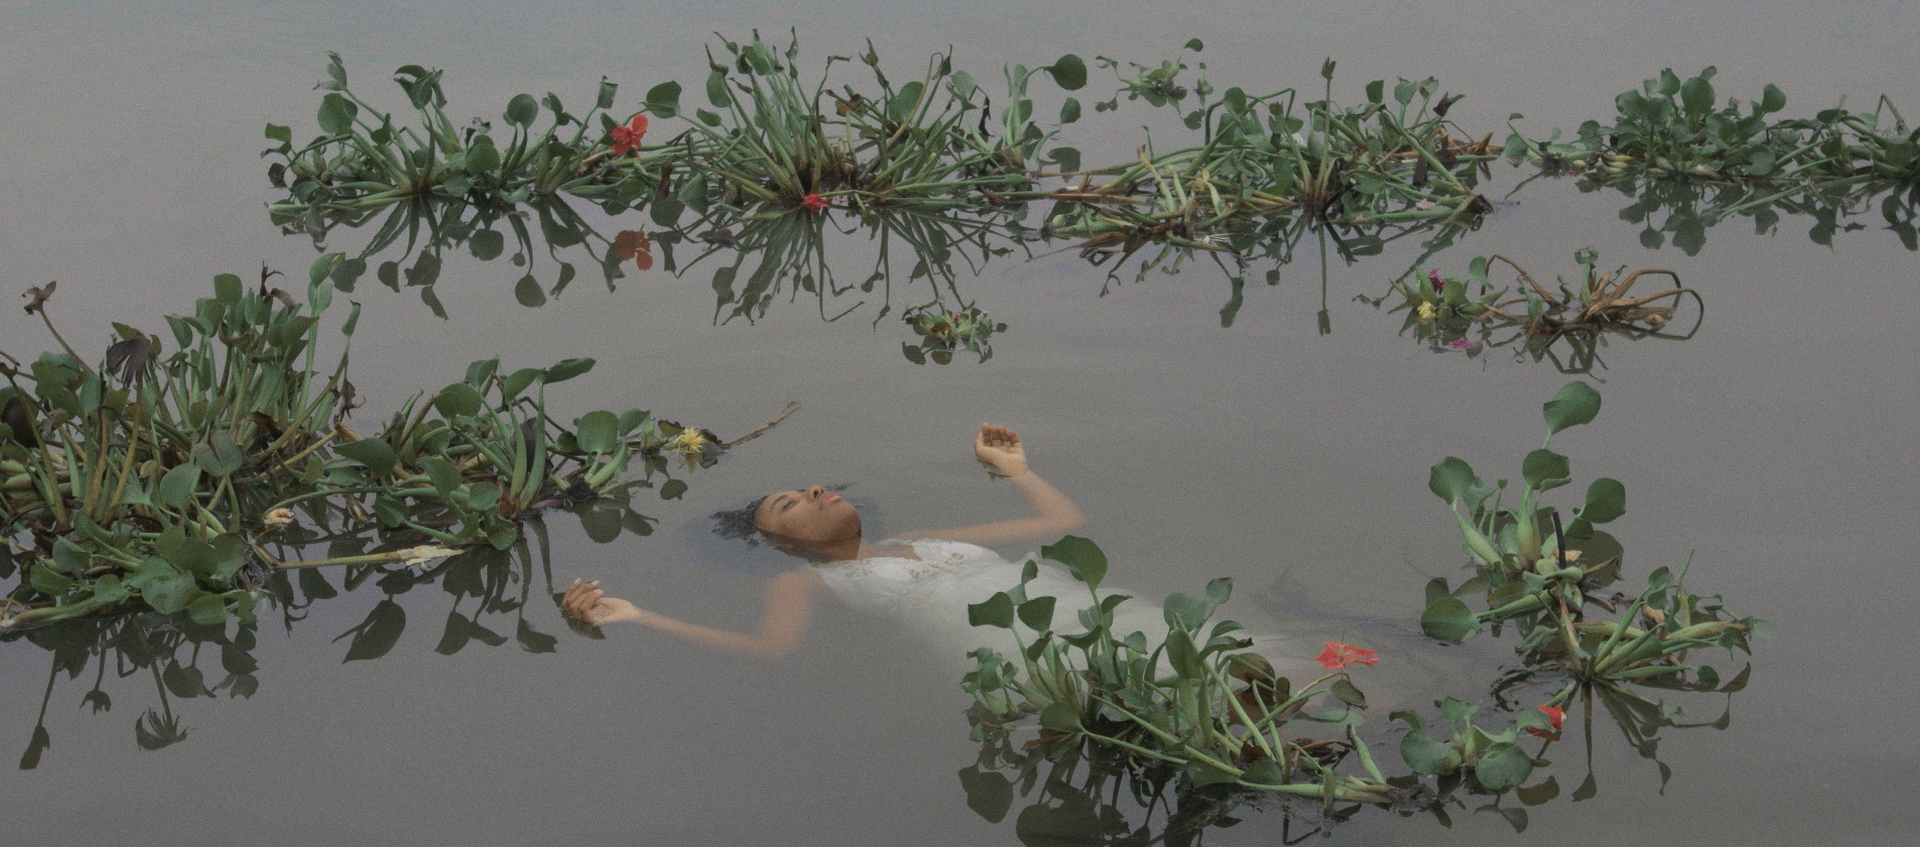 A woman with brown skin wears a white dress and floats in still water with her arms outstretched. Leafy water plants with small flowers surround her.